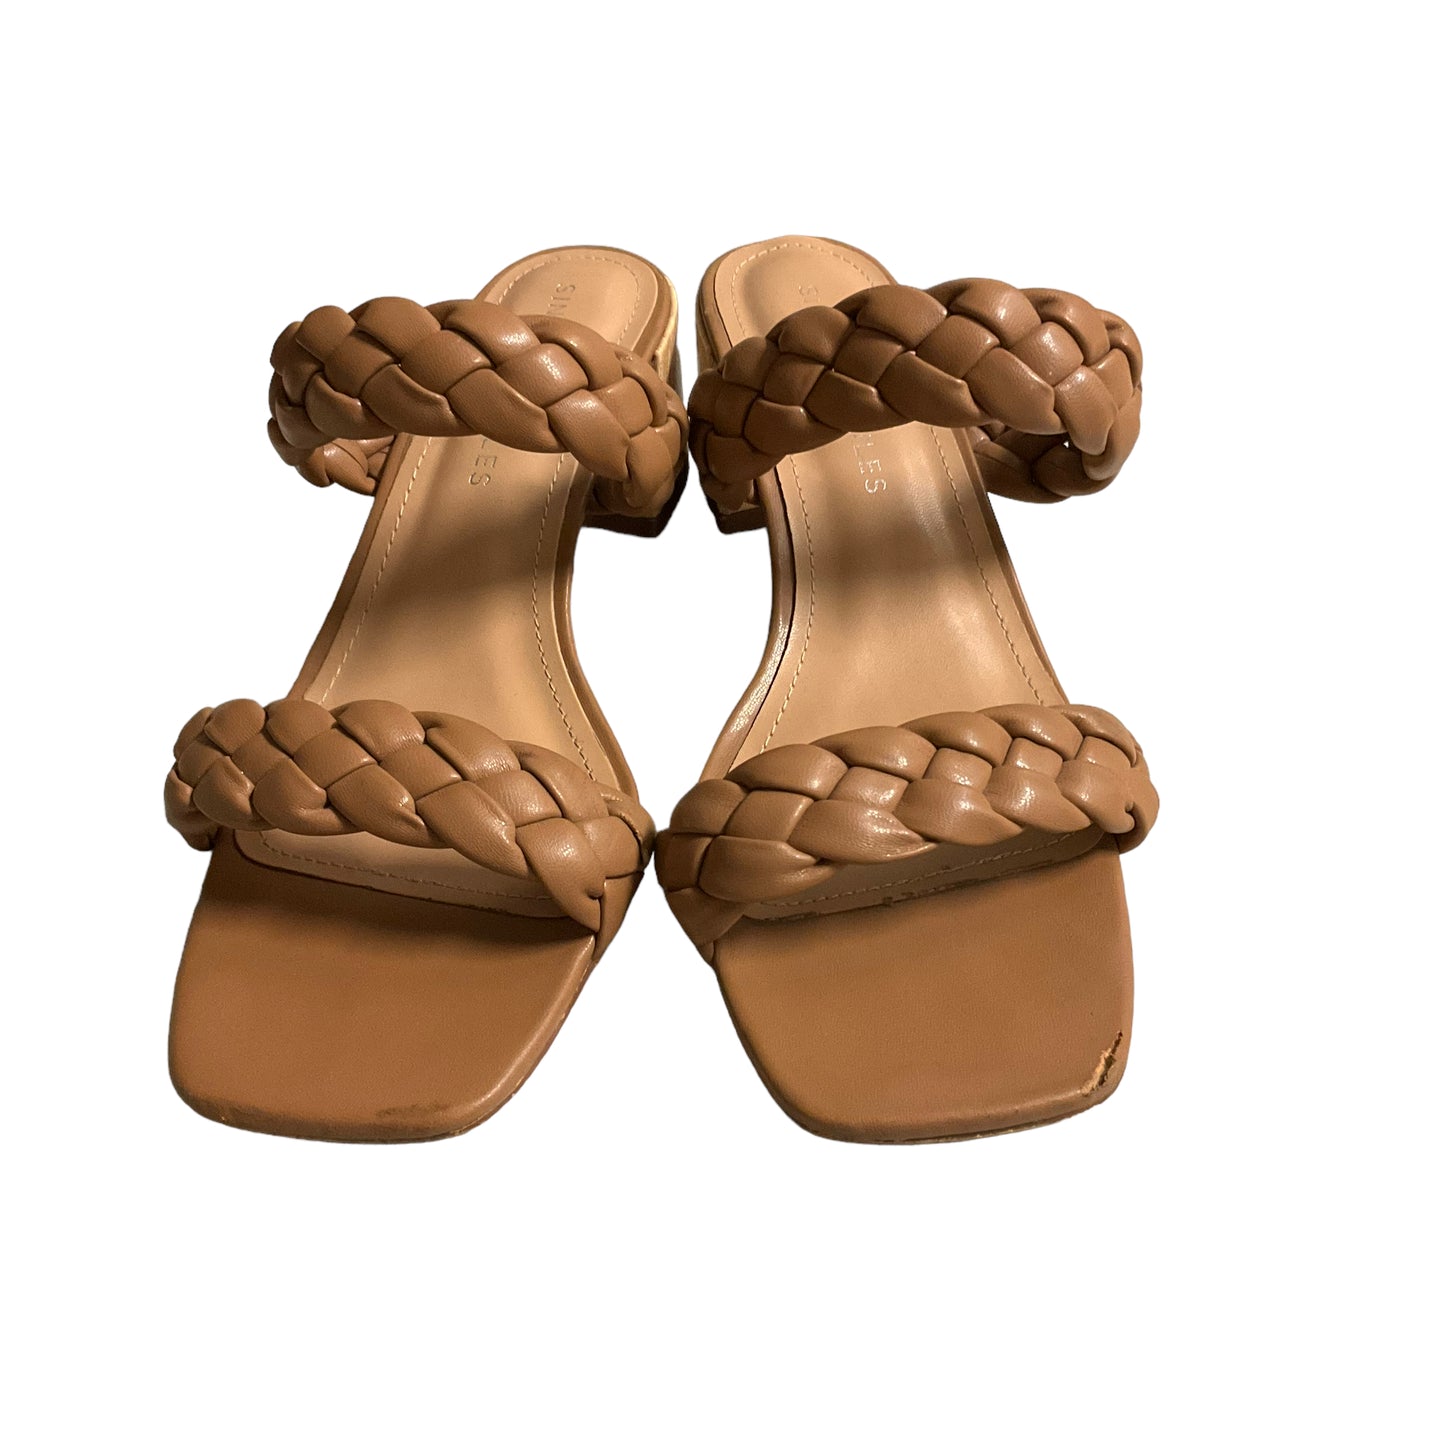 Sandals Heels Block By Sincerely Jules  Size: 9